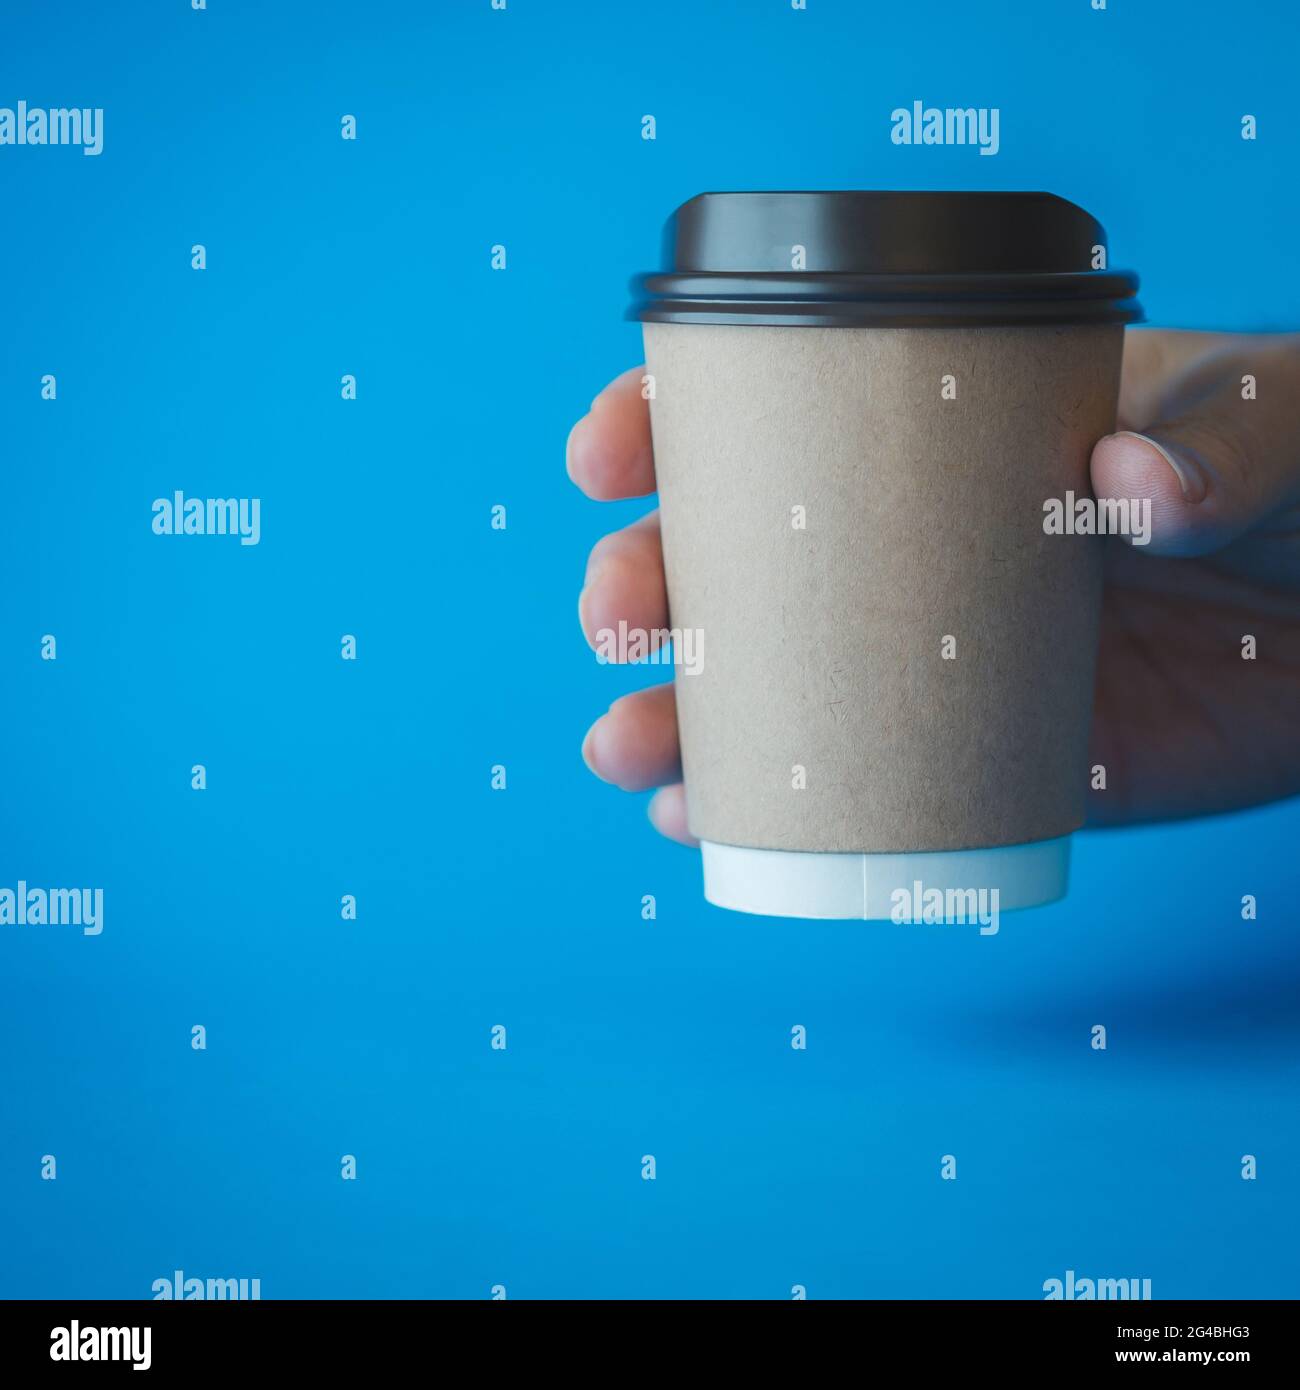 Close up of Man Hand Holding a Recycle Brown Paper Coffee Cup on a Blue Background, Mockup Template for Logo Design, Branding, Copy Space for Text. Stock Photo